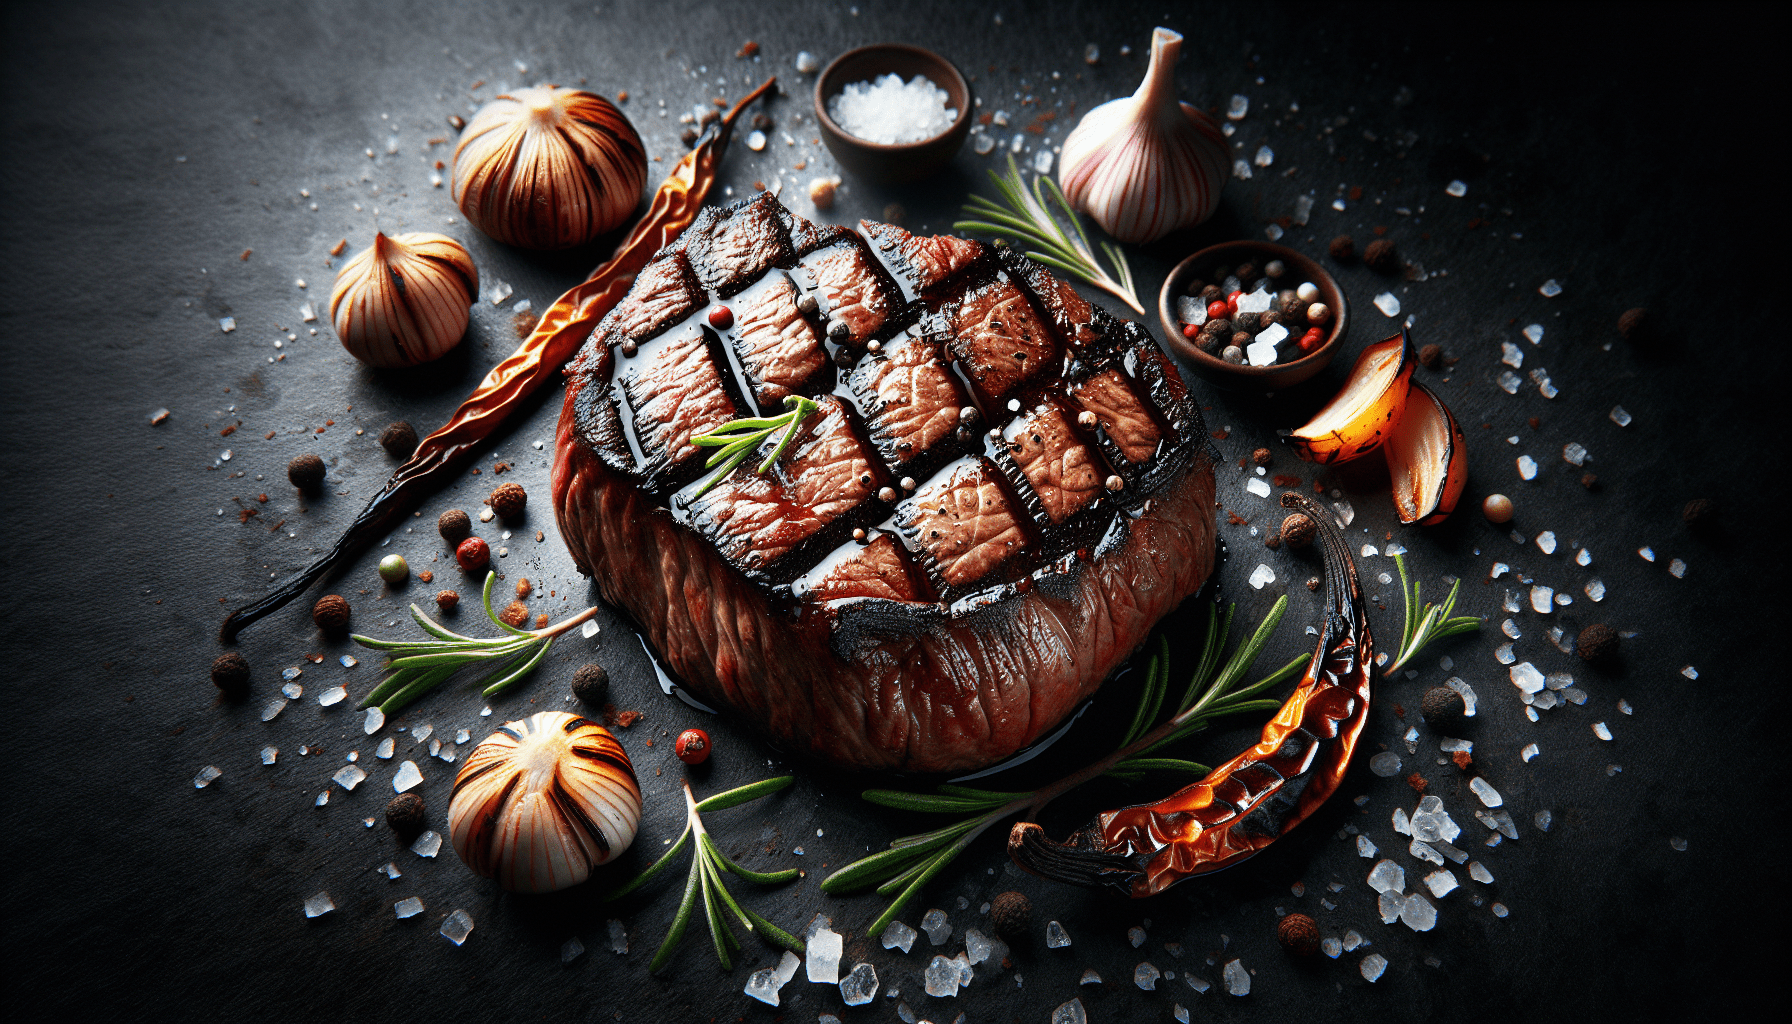 Delicious Filet Mignon Recipes to Elevate Your Gourmet Meal